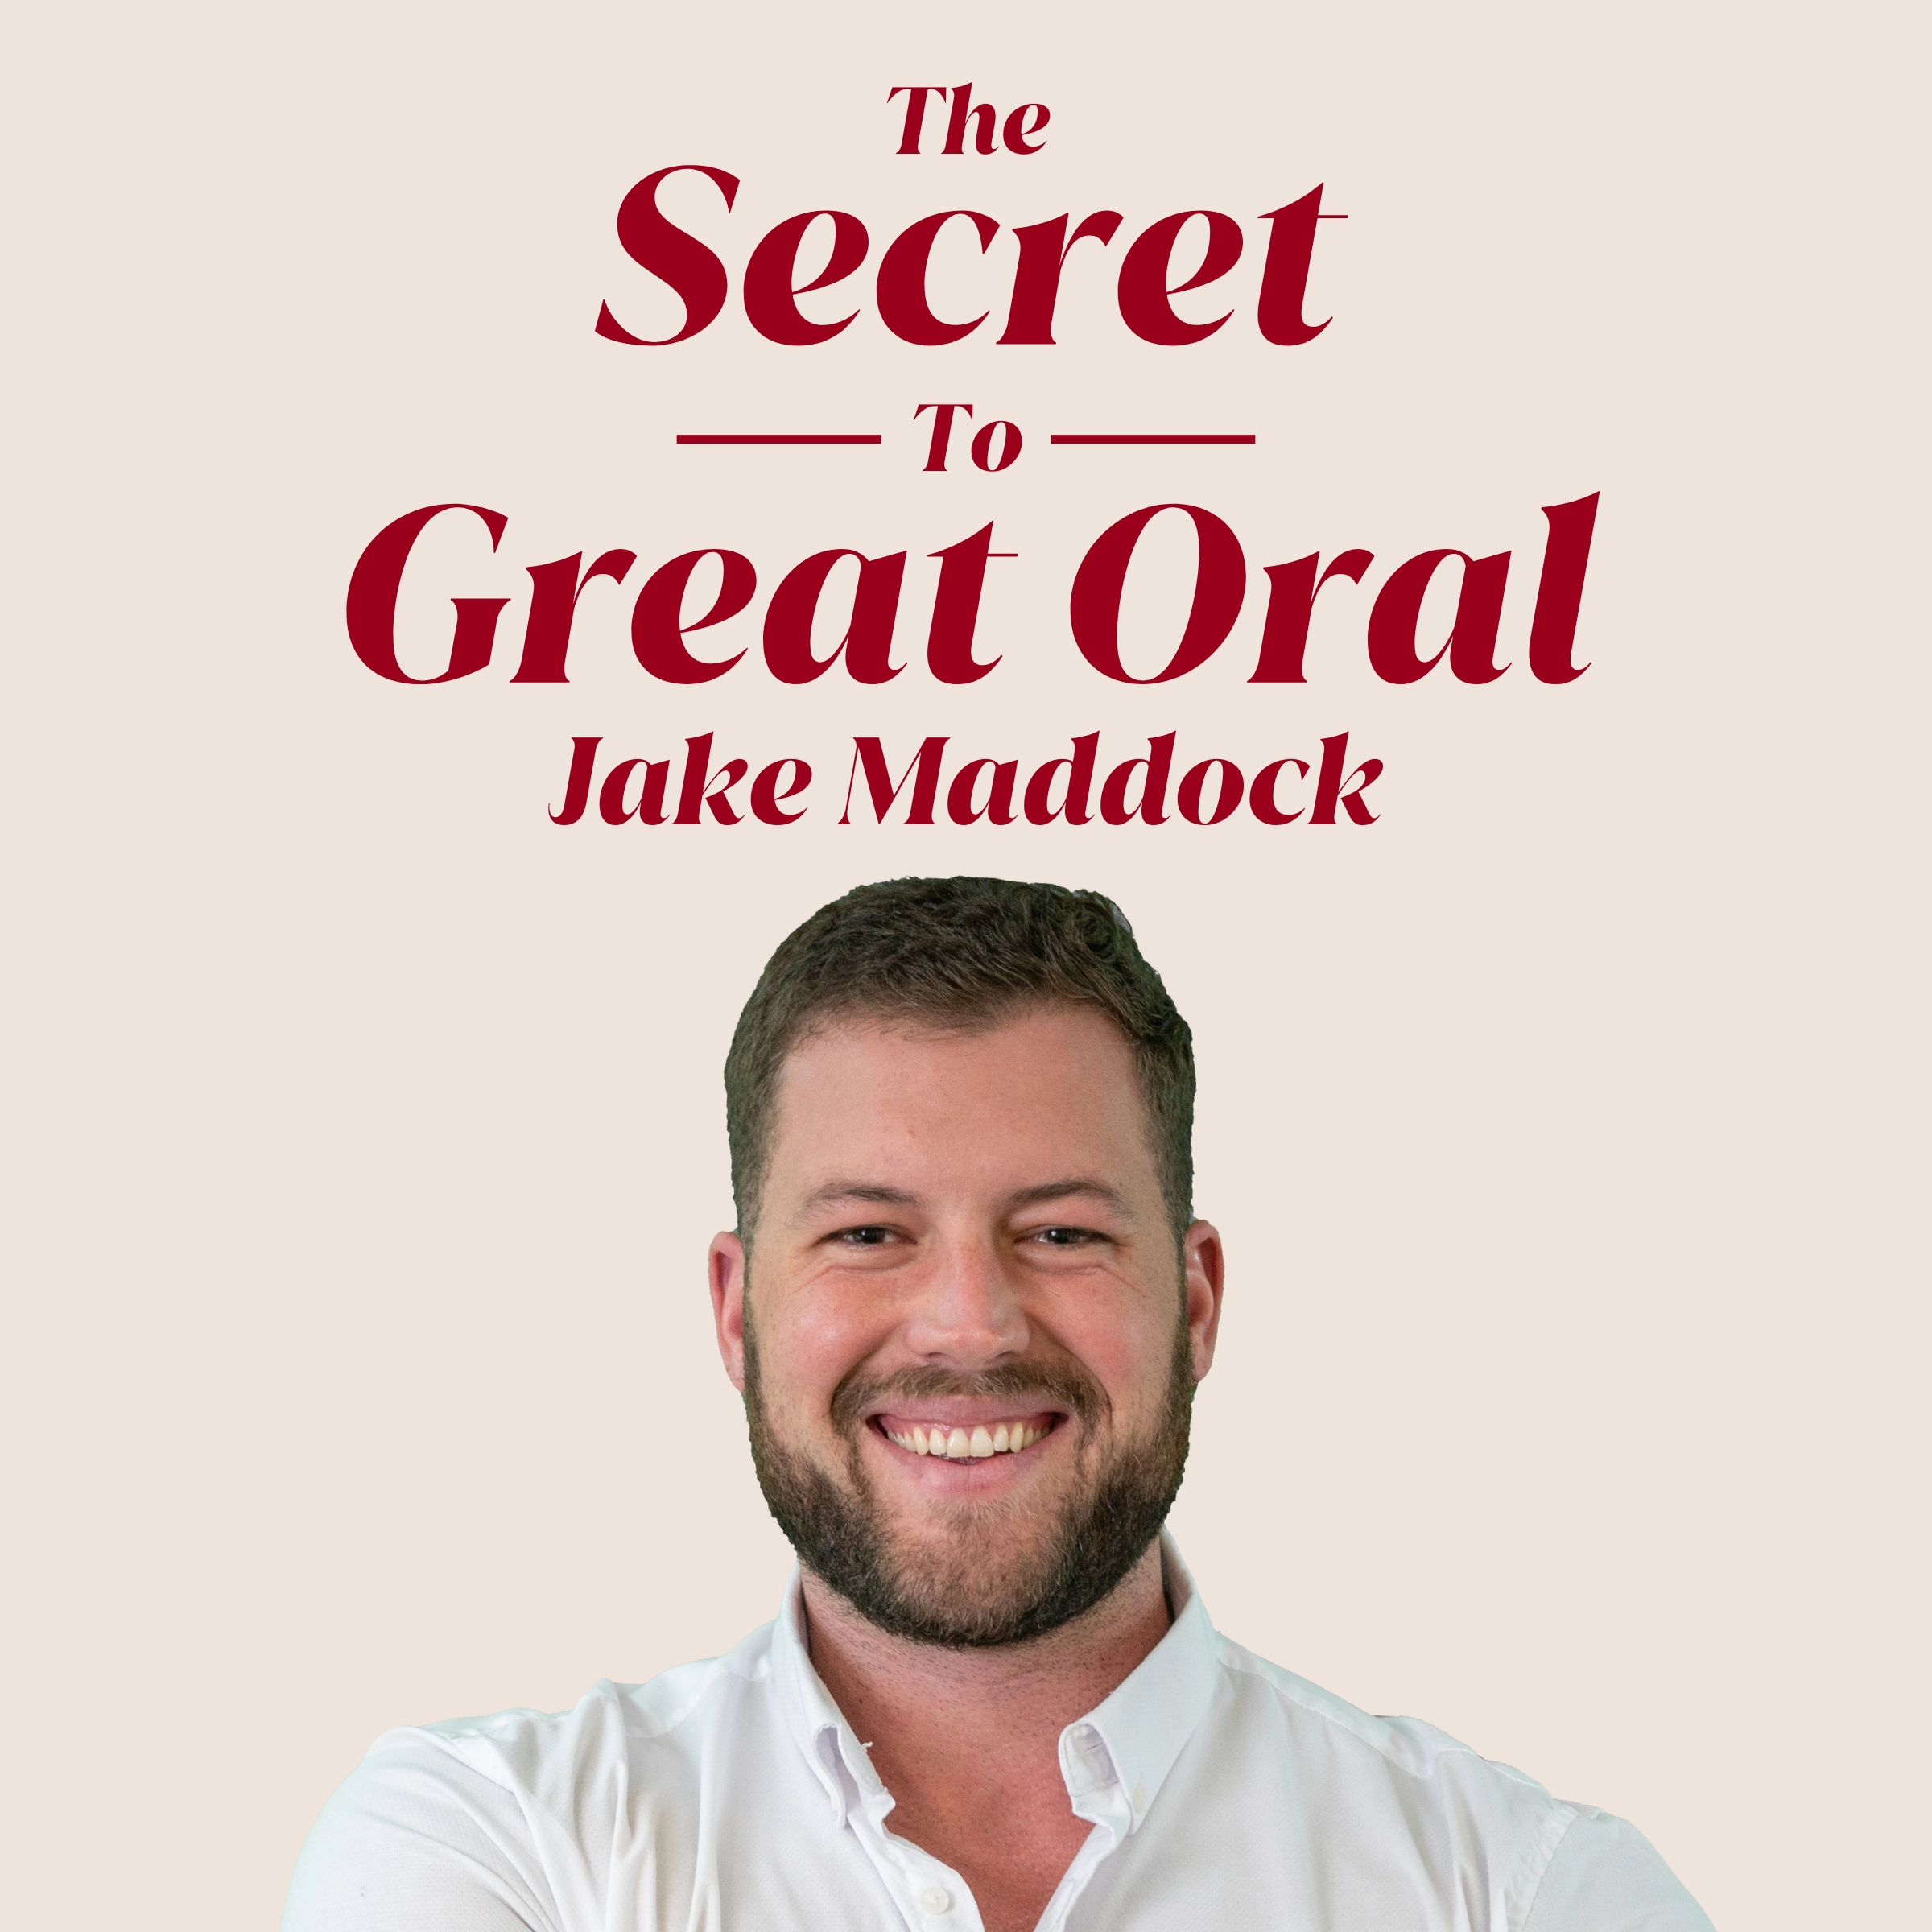 The Secret to Great Oral Audiobook by Jake Maddock